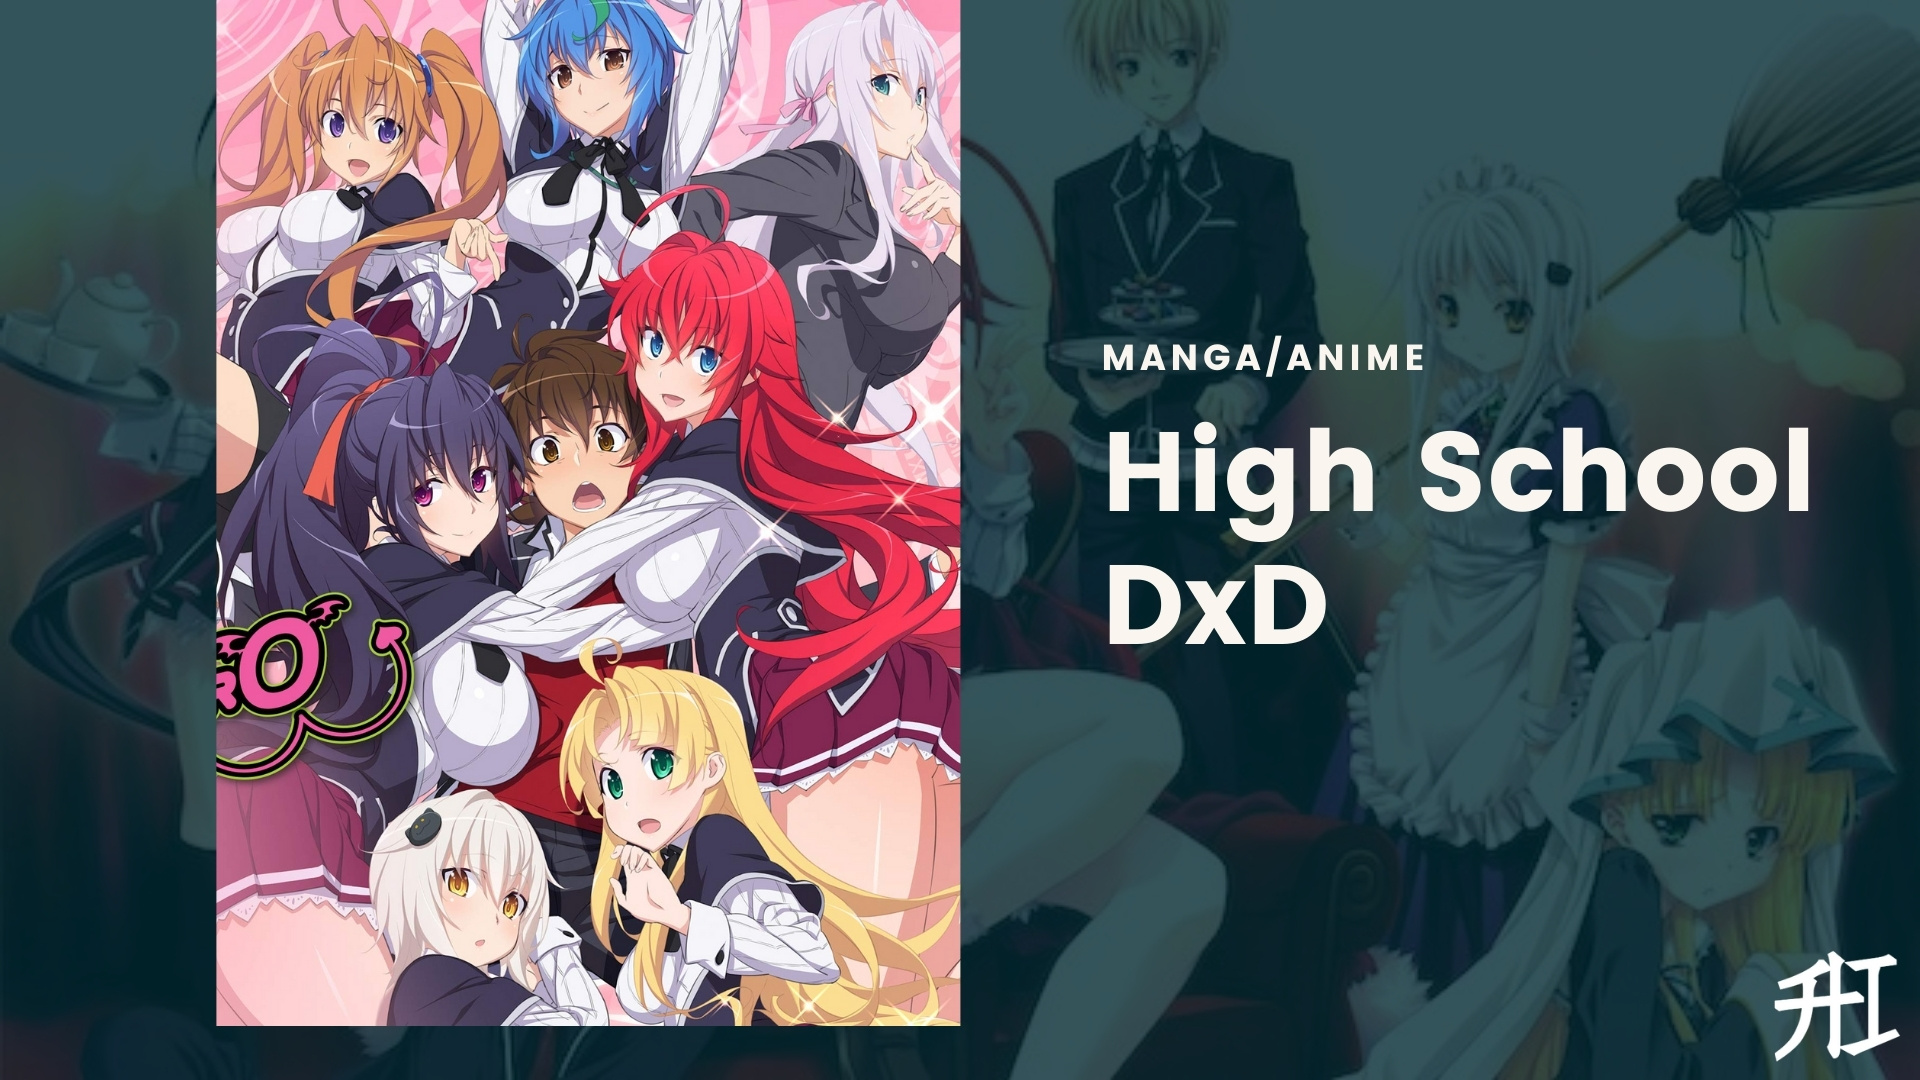 Full of Cute Teenagers, Here Are 5 Recommendations for Harem School Anime  2022 with Exciting Stories